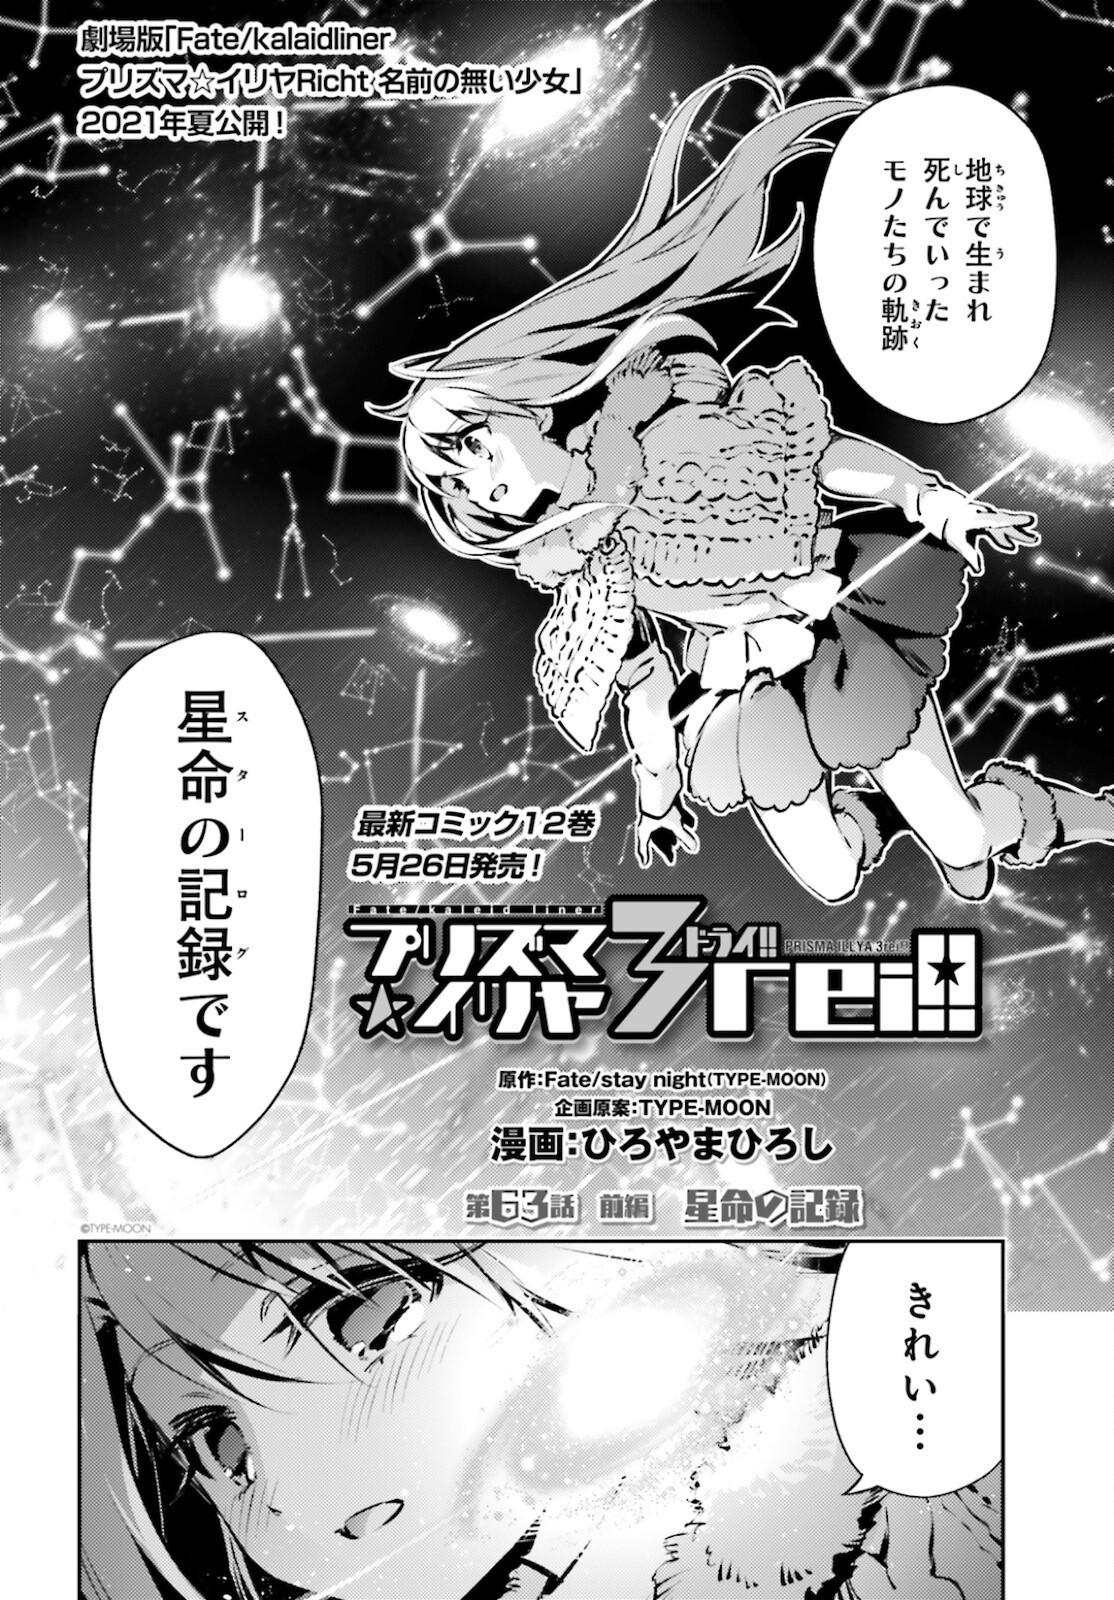 Fate/Kaleid Liner Prisma Illya Drei! - Chapter 63 - Page 2